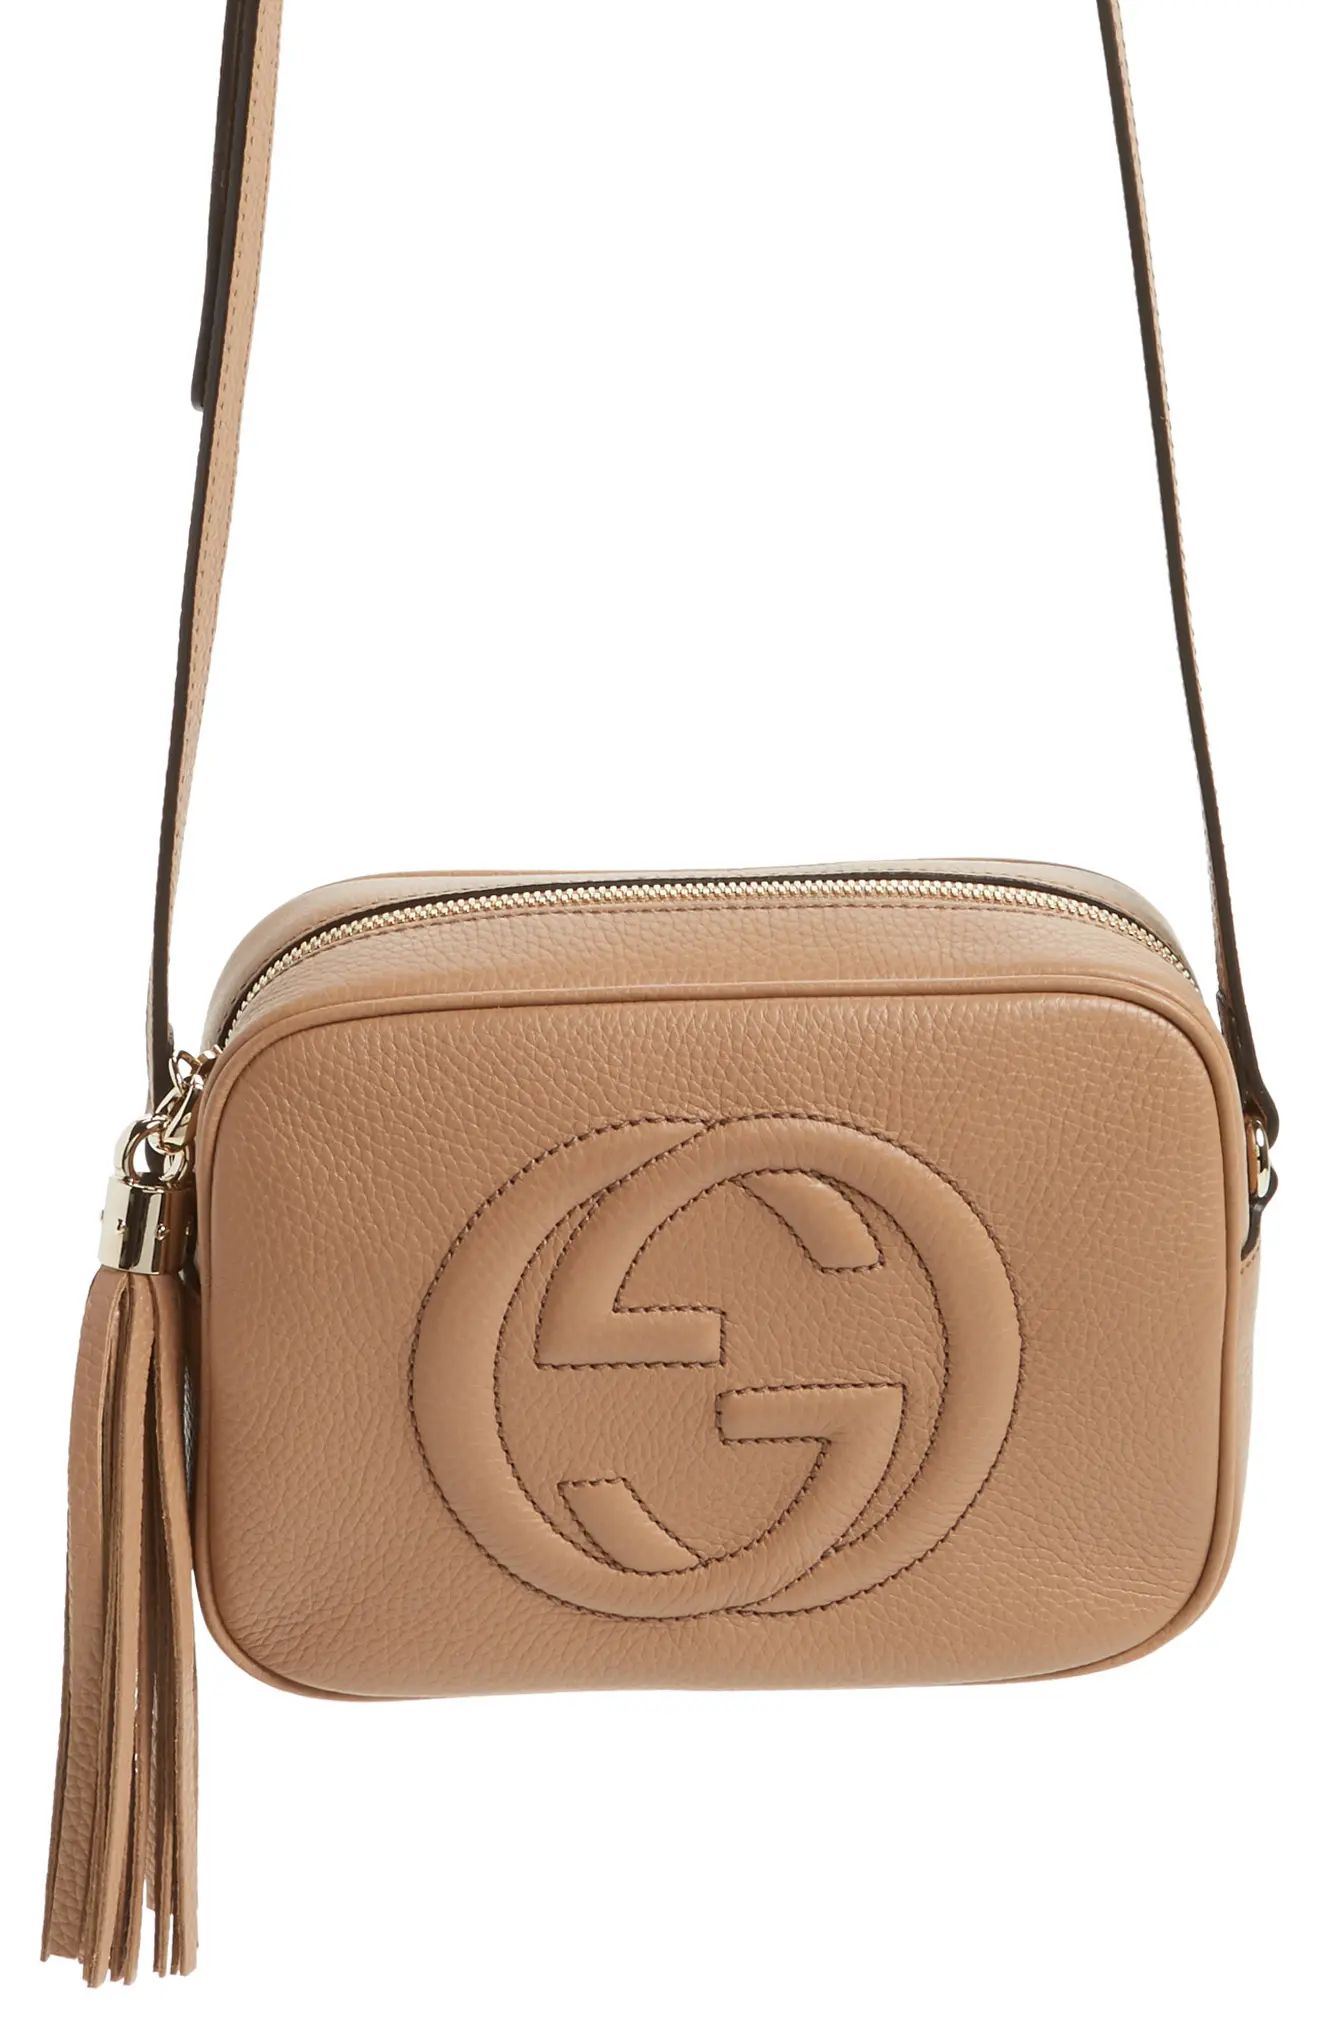 Gucci Soho Disco Leather Bag | Nordstrom